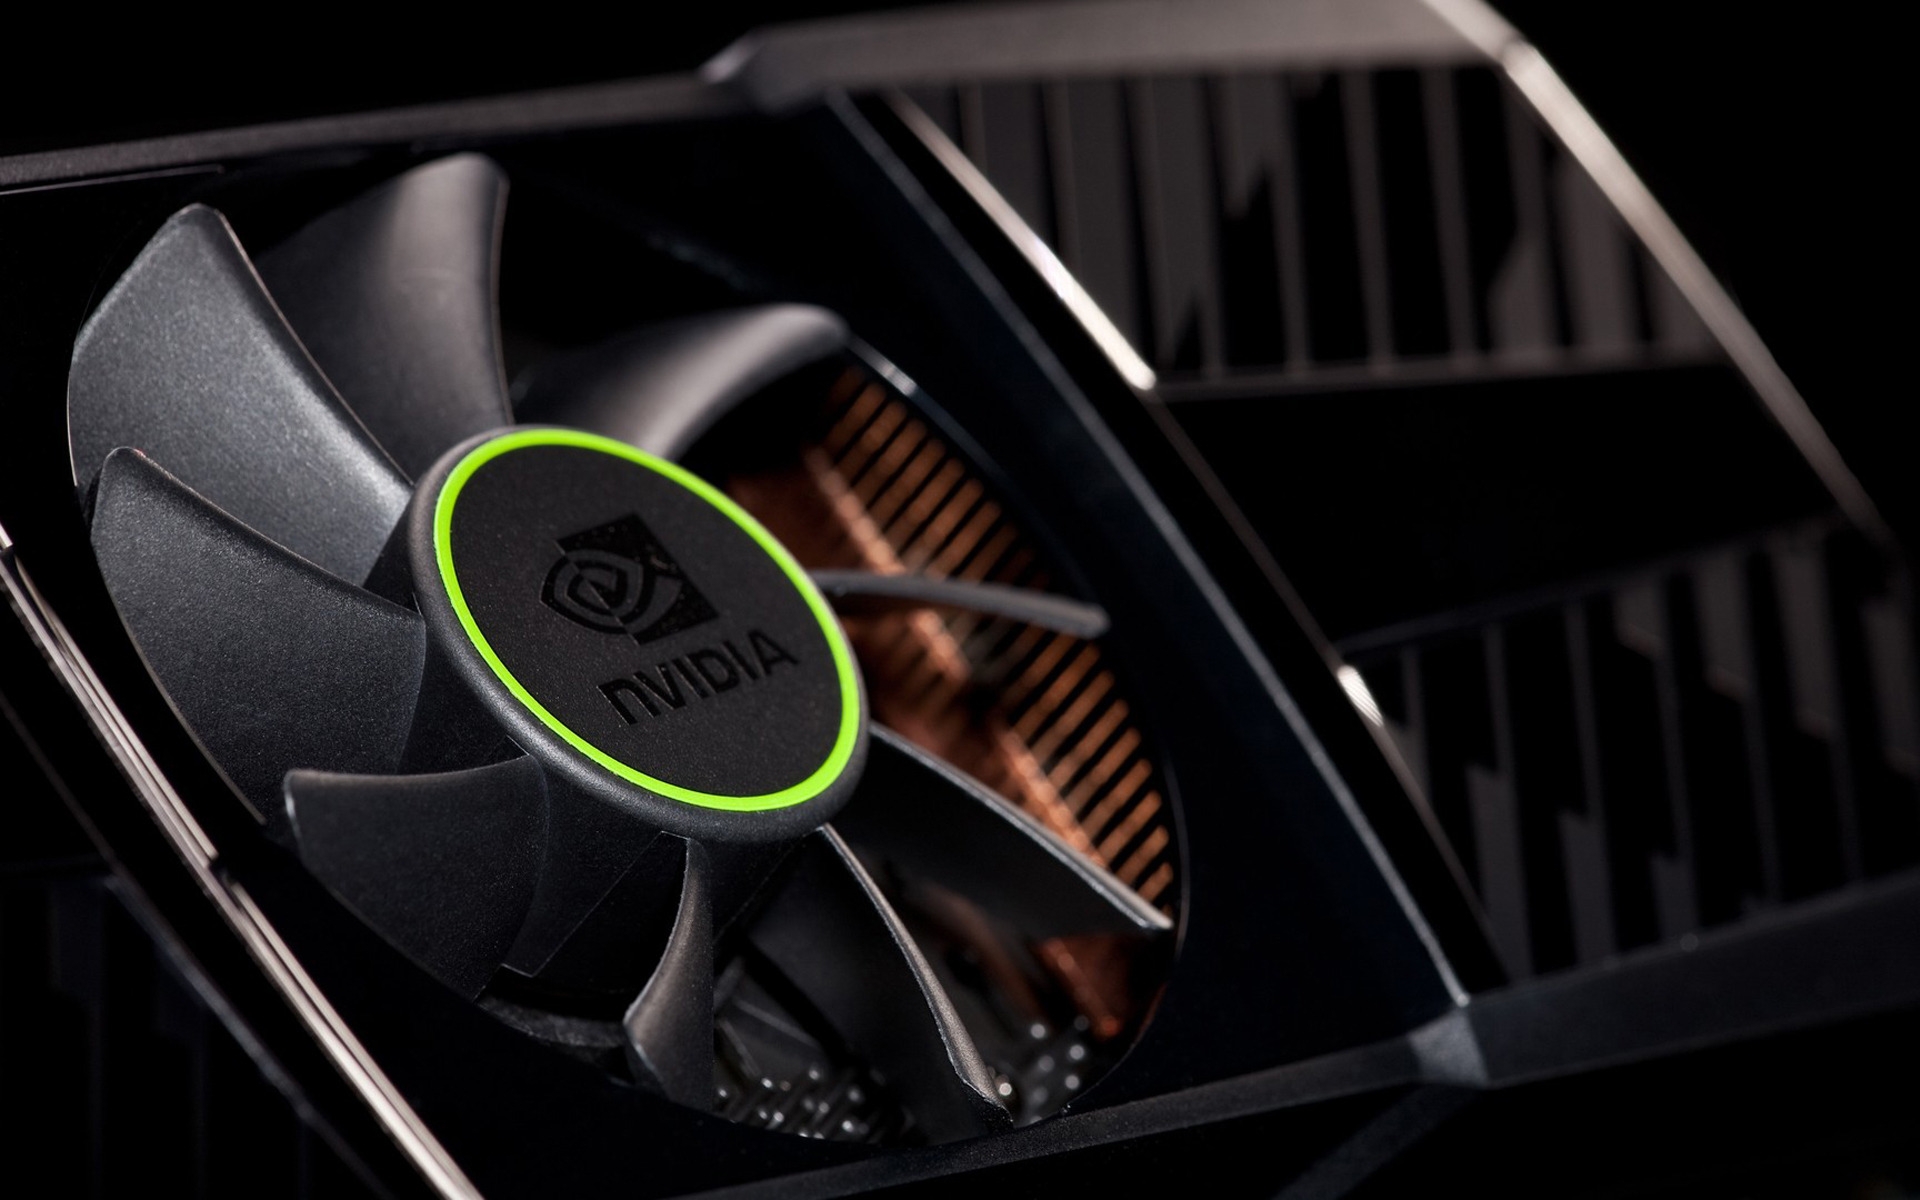 nVidia Cooler for 1920 x 1200 widescreen resolution